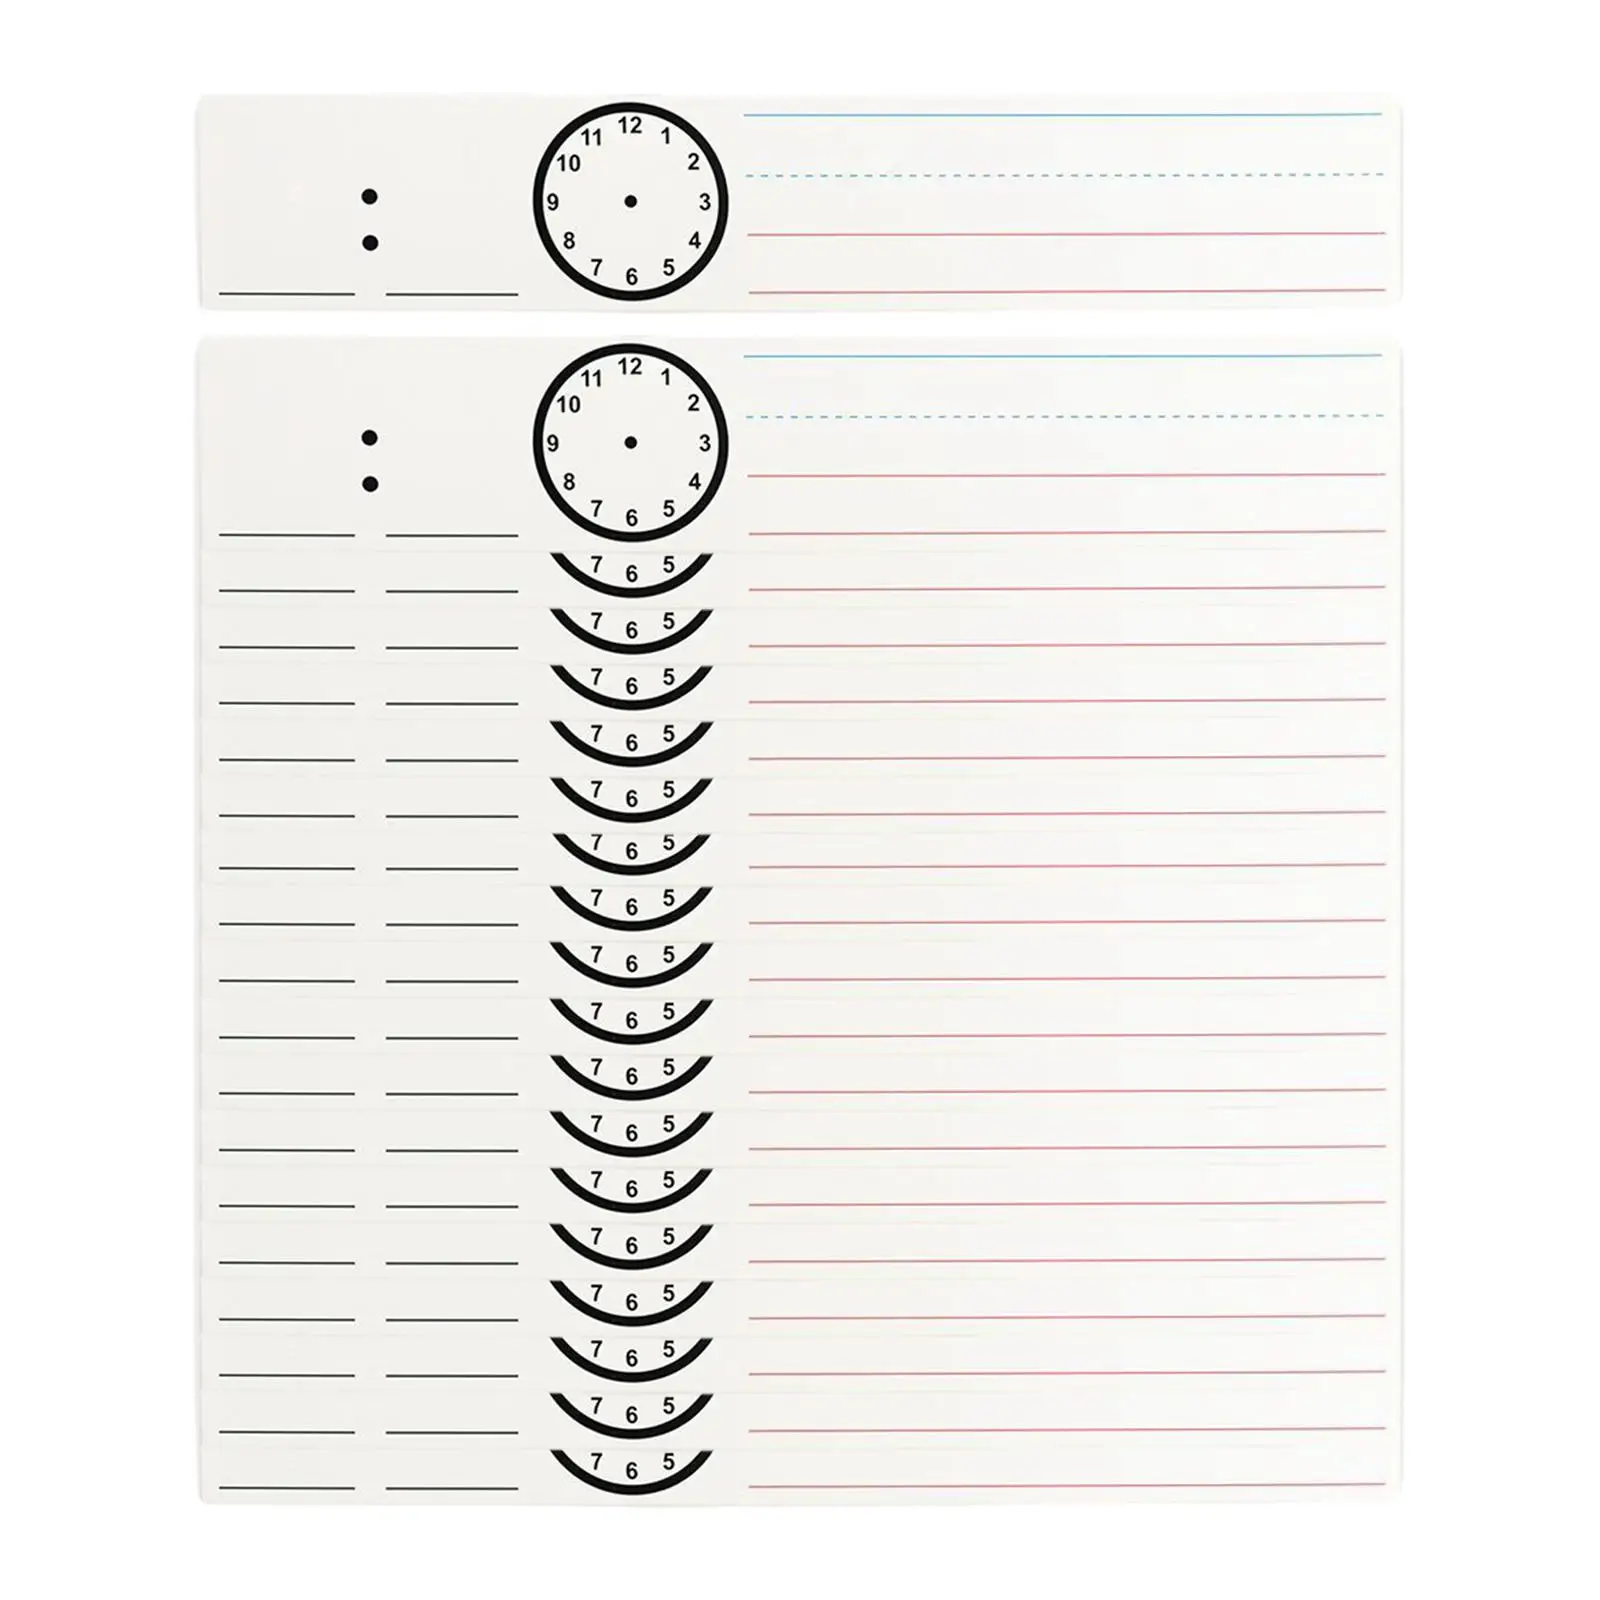 20 Pieces Card Write on And Wipe Off for Nursery Room Preschool